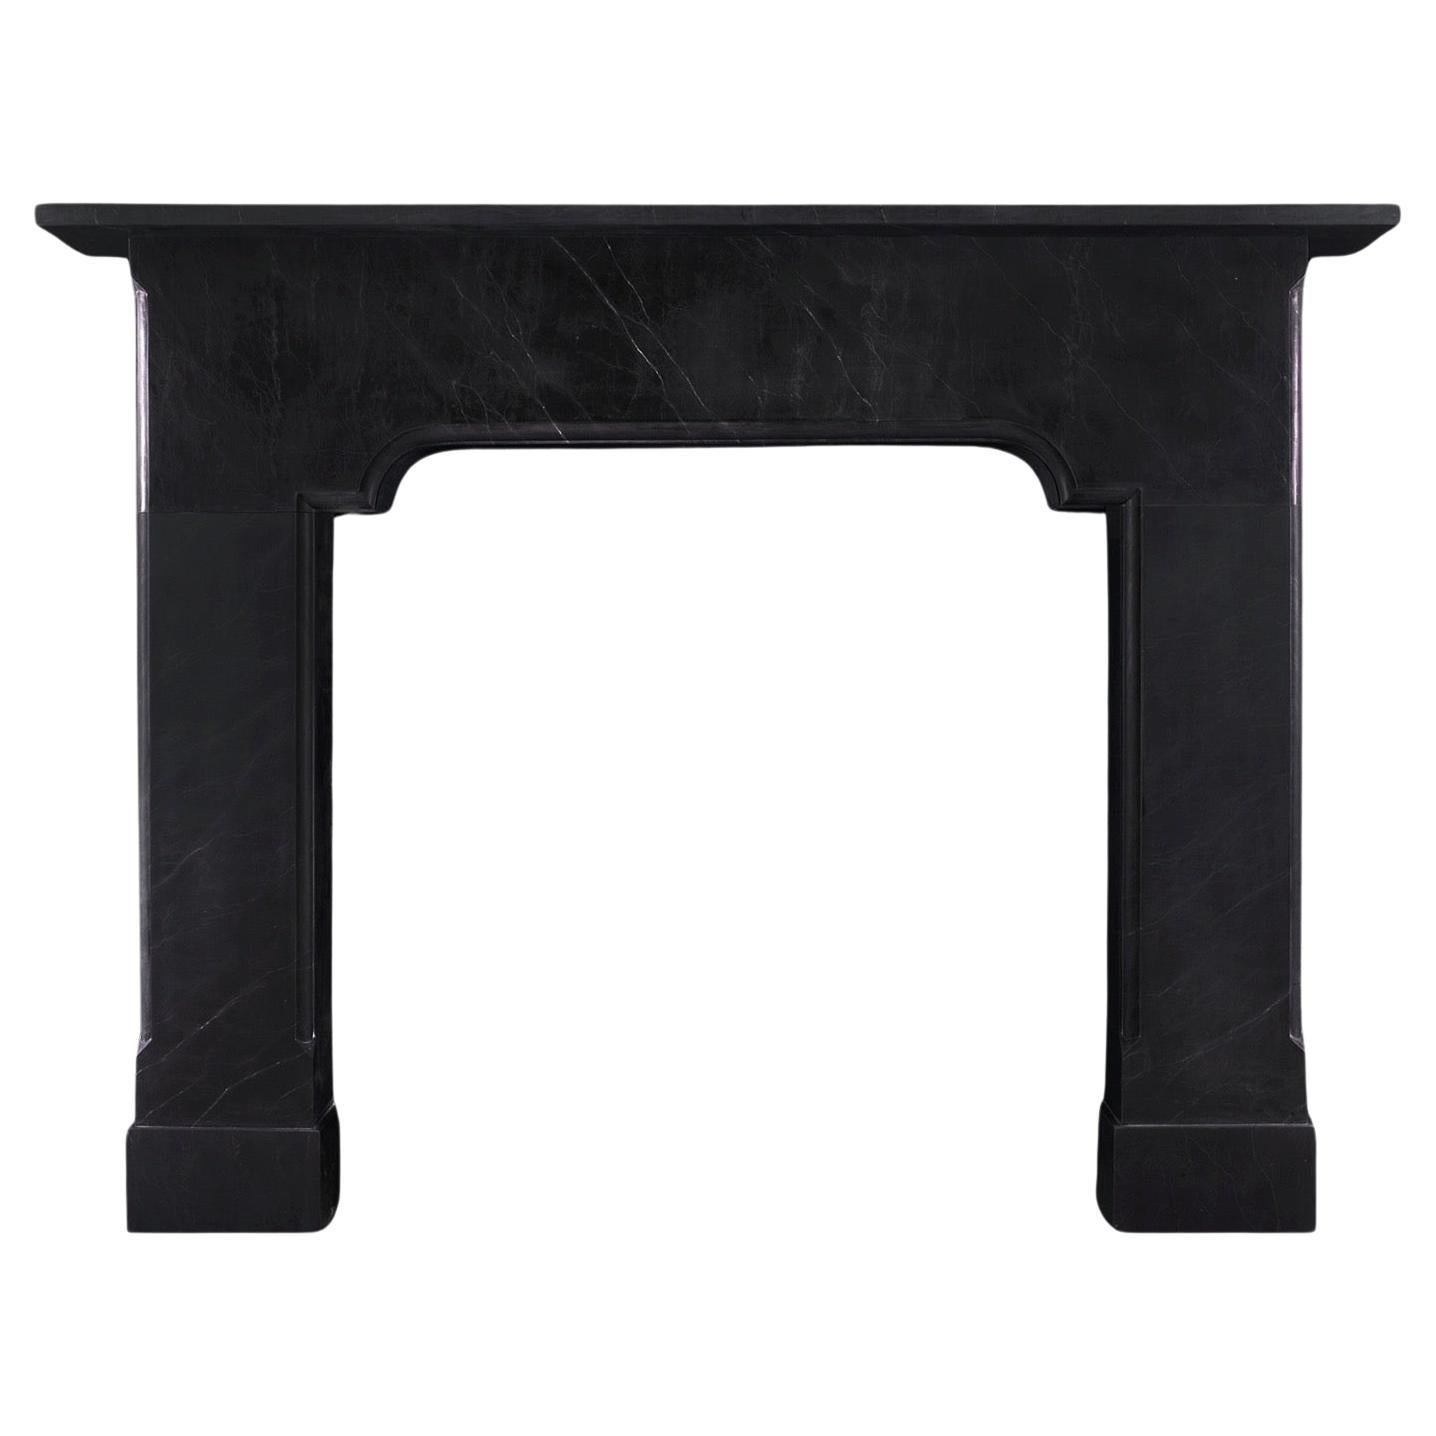 An Imposing Architectural Black Marble Fireplace 